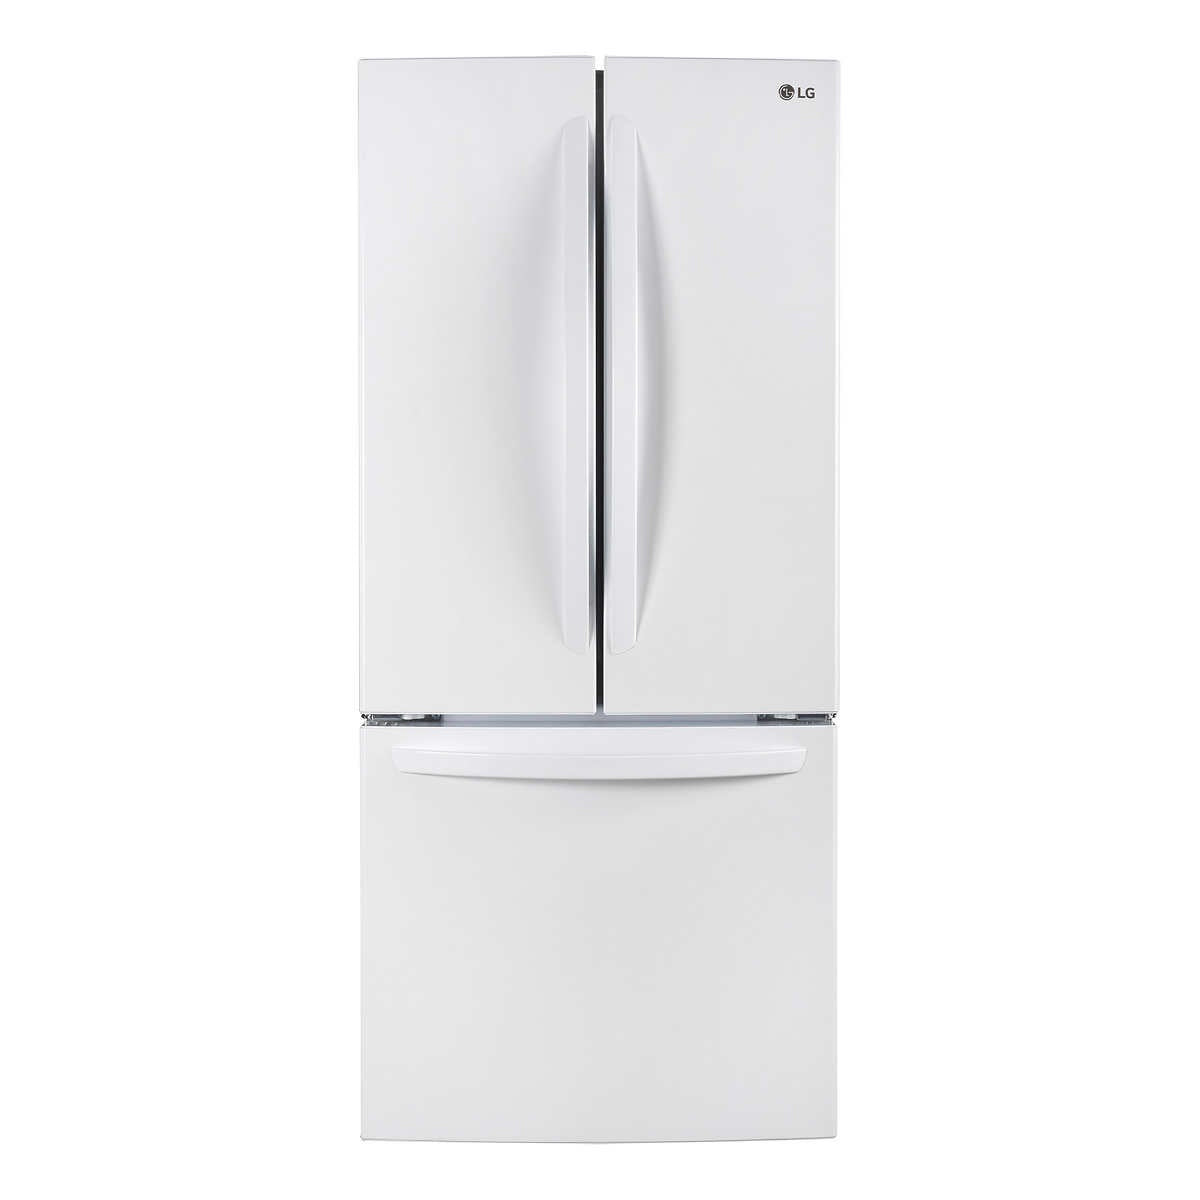 LG 30 in. 21.8 cu. ft. Smudge-resistant White French Door Refrigerator with SmartDiagnosis